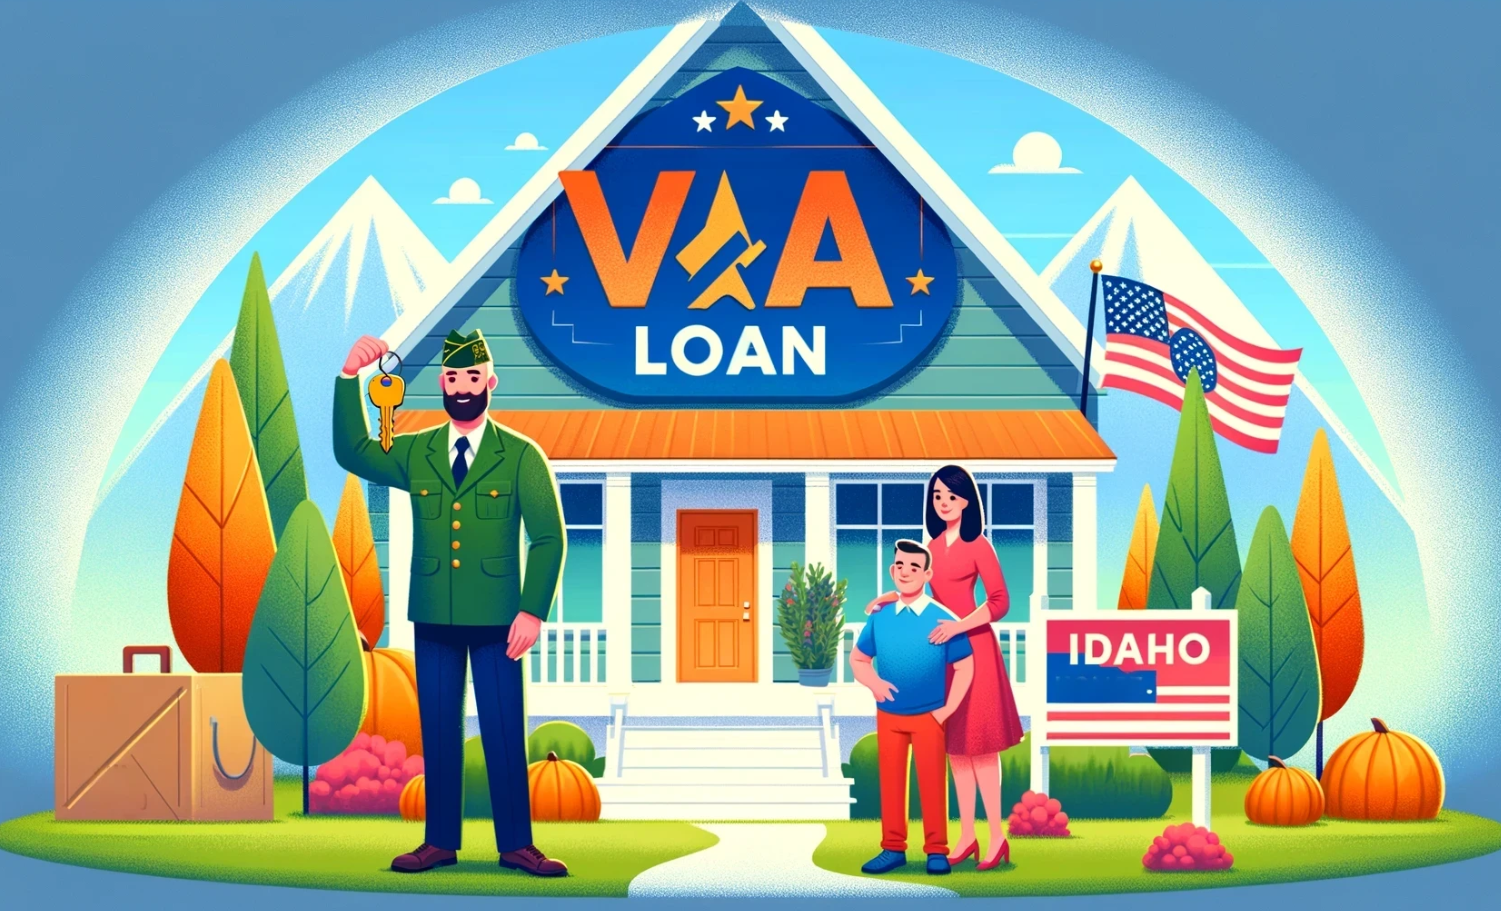 Idaho landscape with veteran holding house keys, happy family in front of new home, emphasizing VA home loans and homeownership benefits for Idaho veterans